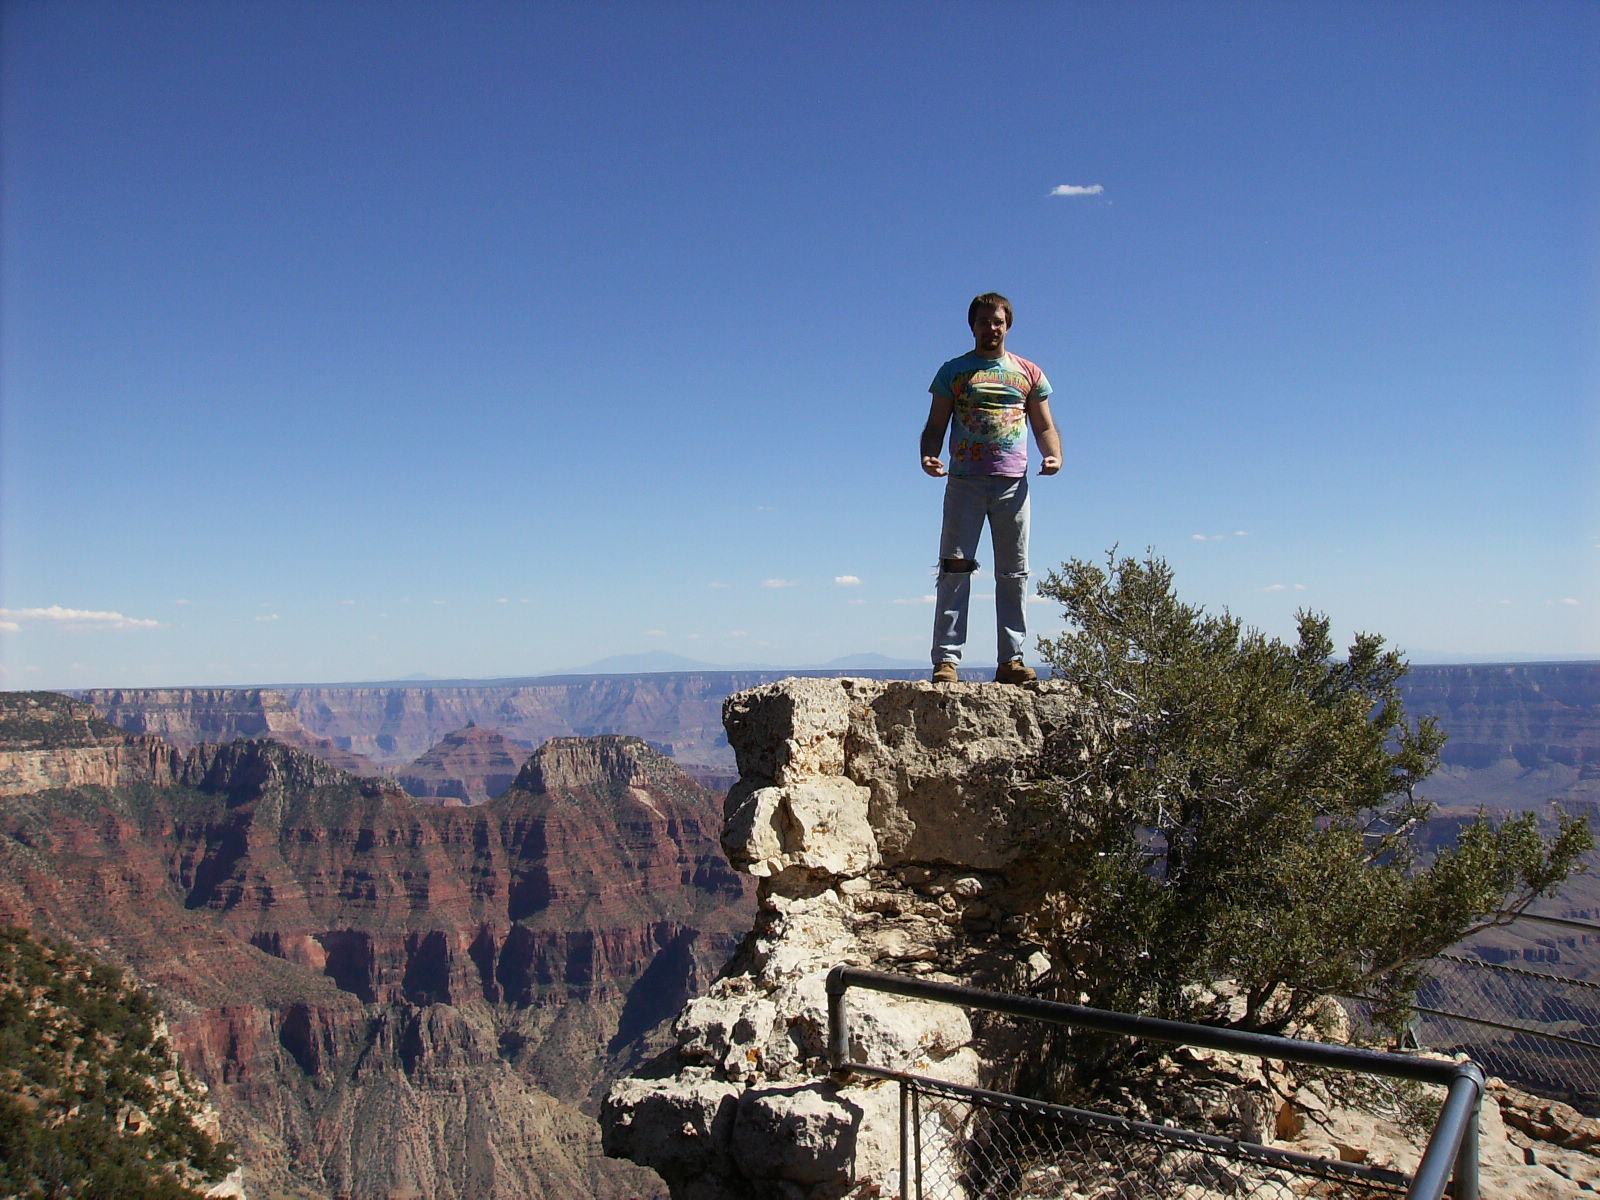 Me at the North Rim Grand Canyon with no safety net :)